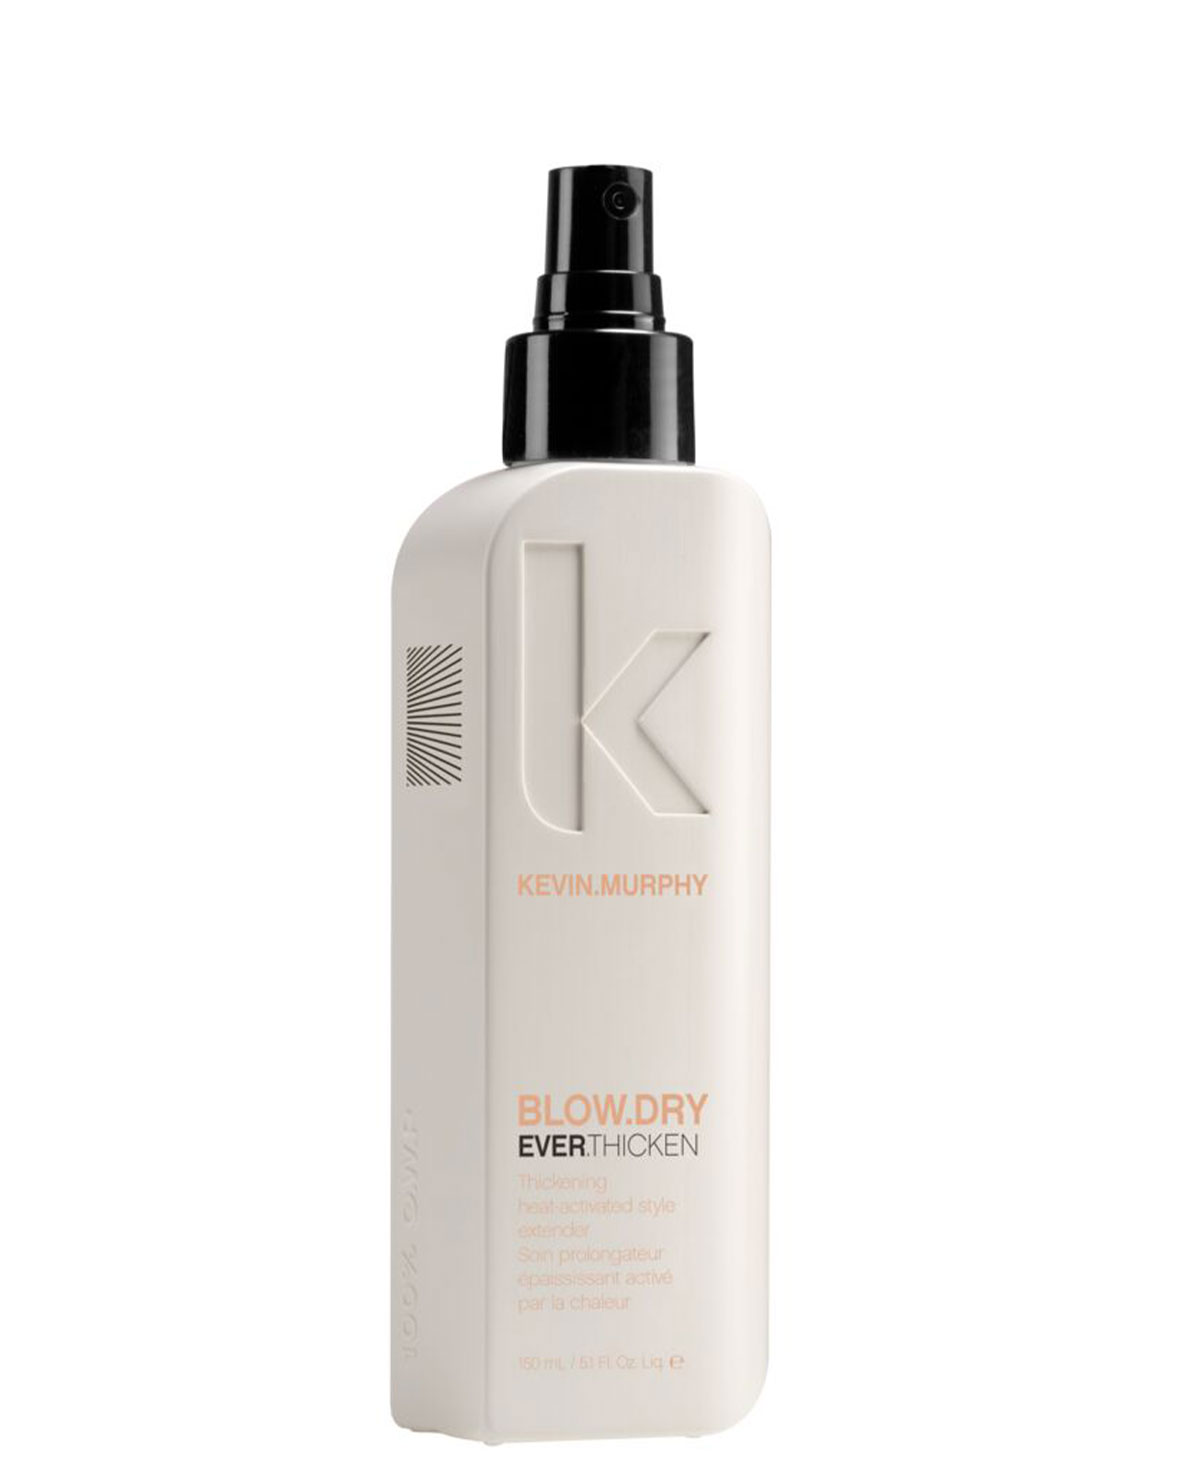 Kevin.Murphy BLOW.DRY EVER.THICKEN 150ml